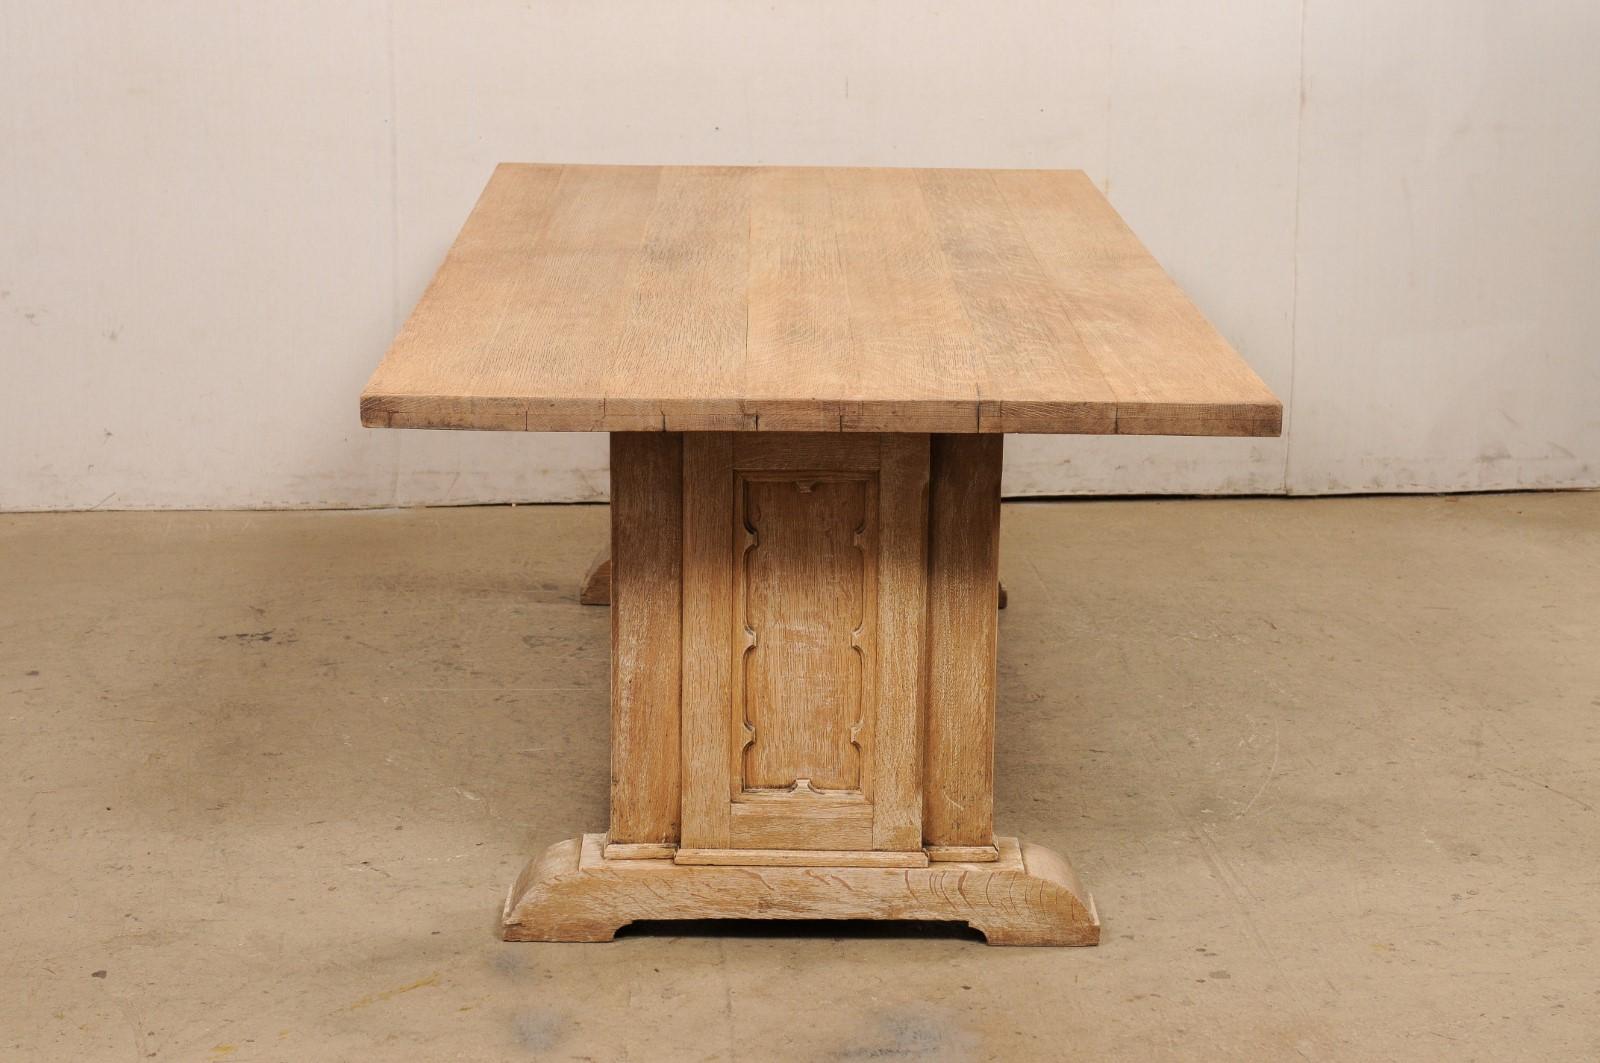 French 7 Ft Long Bleached Wood Dining Table w/Trestle Legs, 1920's For Sale 2